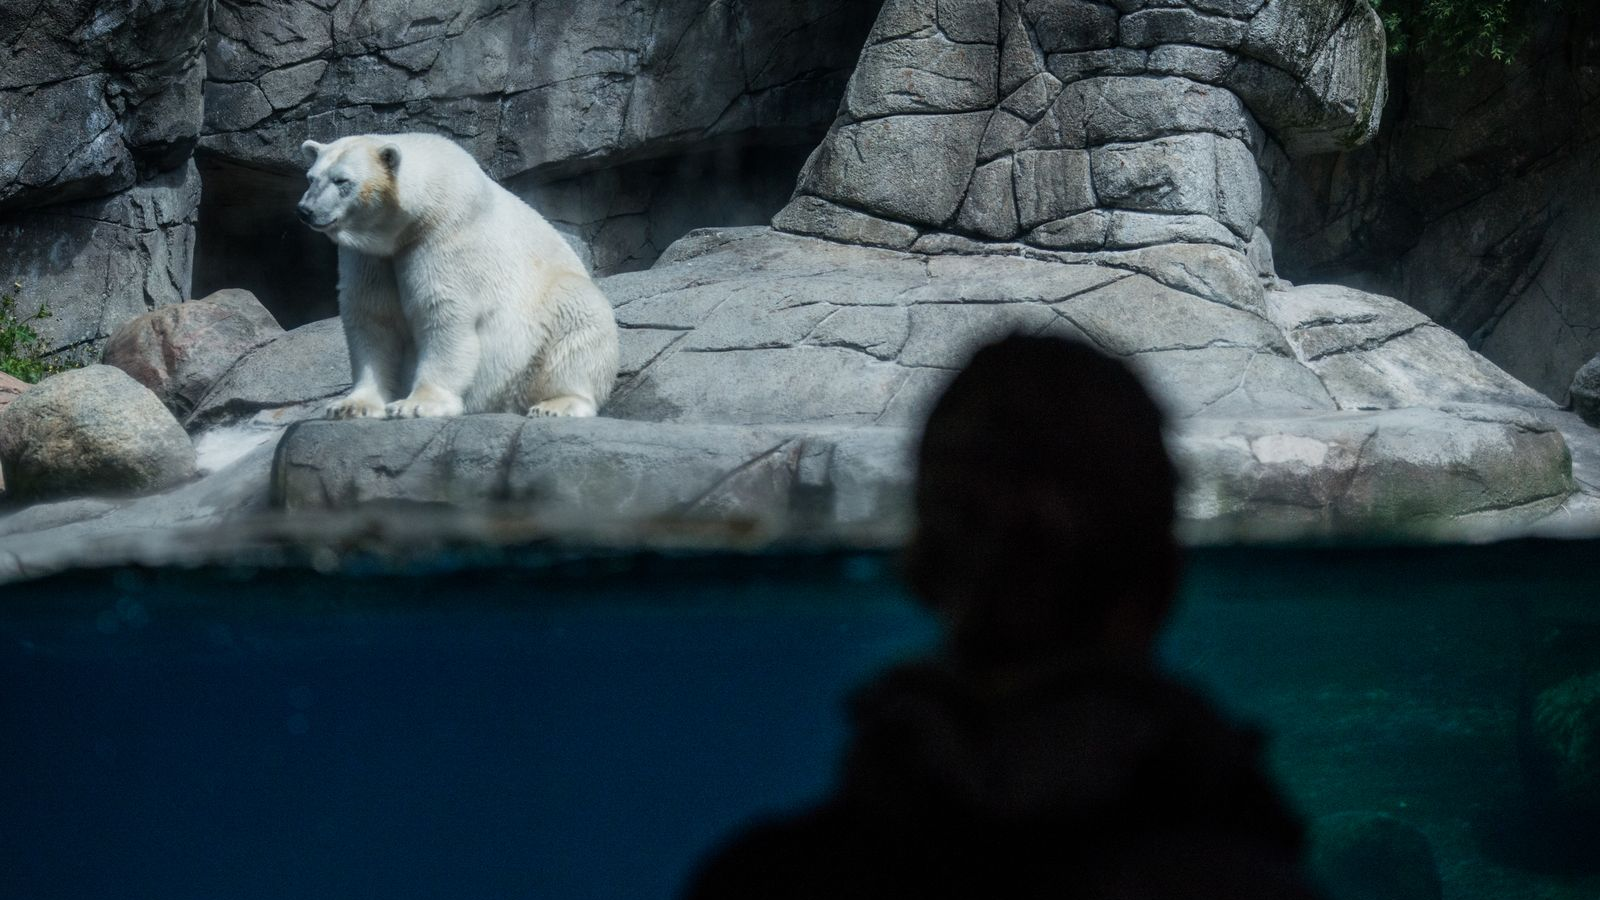 A photo of someone looking at a polar bear in a zoo